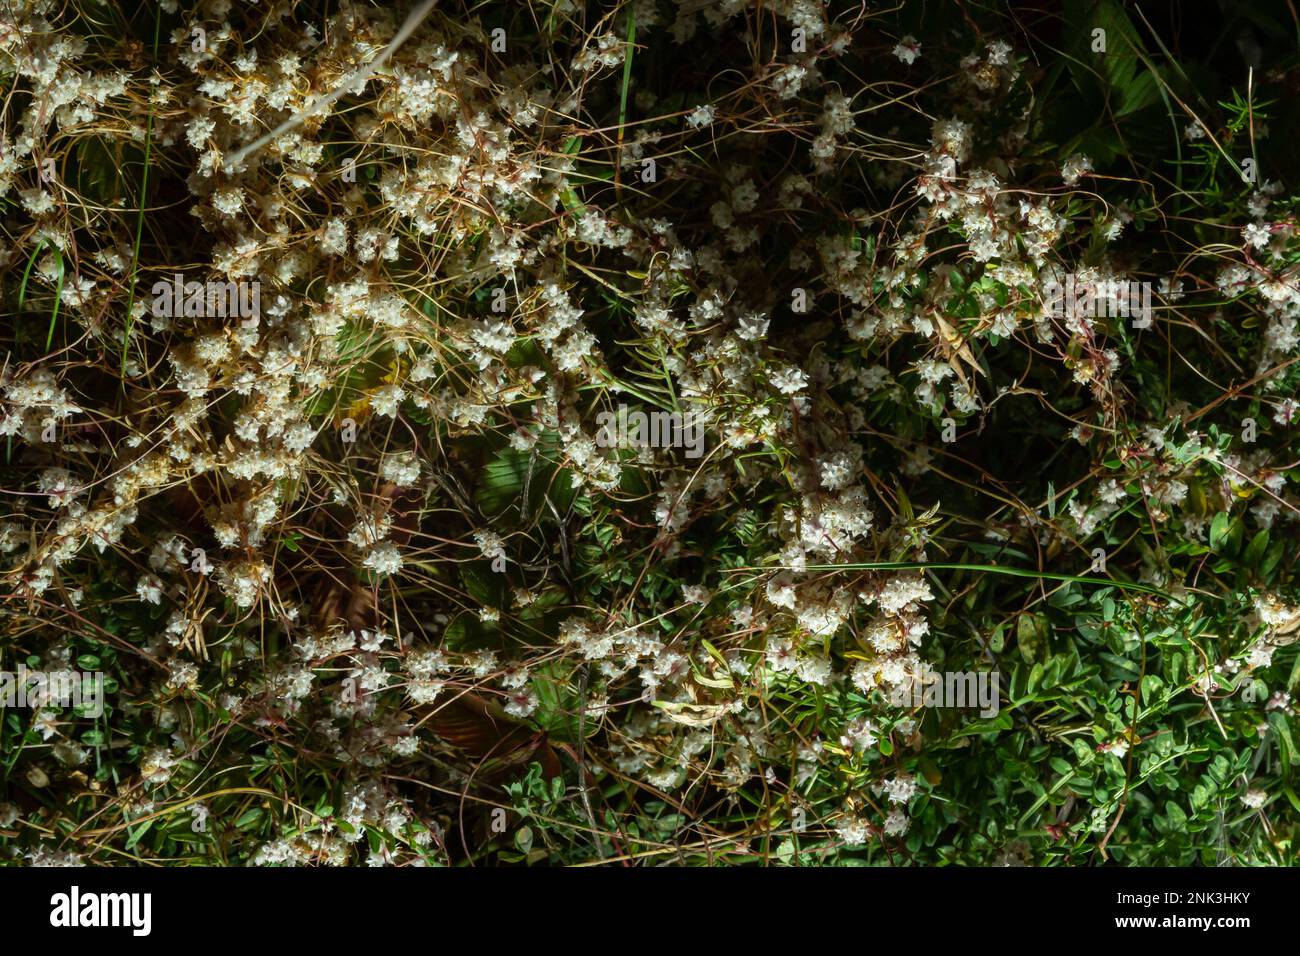 Flora of Gran Canaria - thread-like tangled stems of Cuscuta approximata aka dodder parasitic plant natural macro floral background. Stock Photo